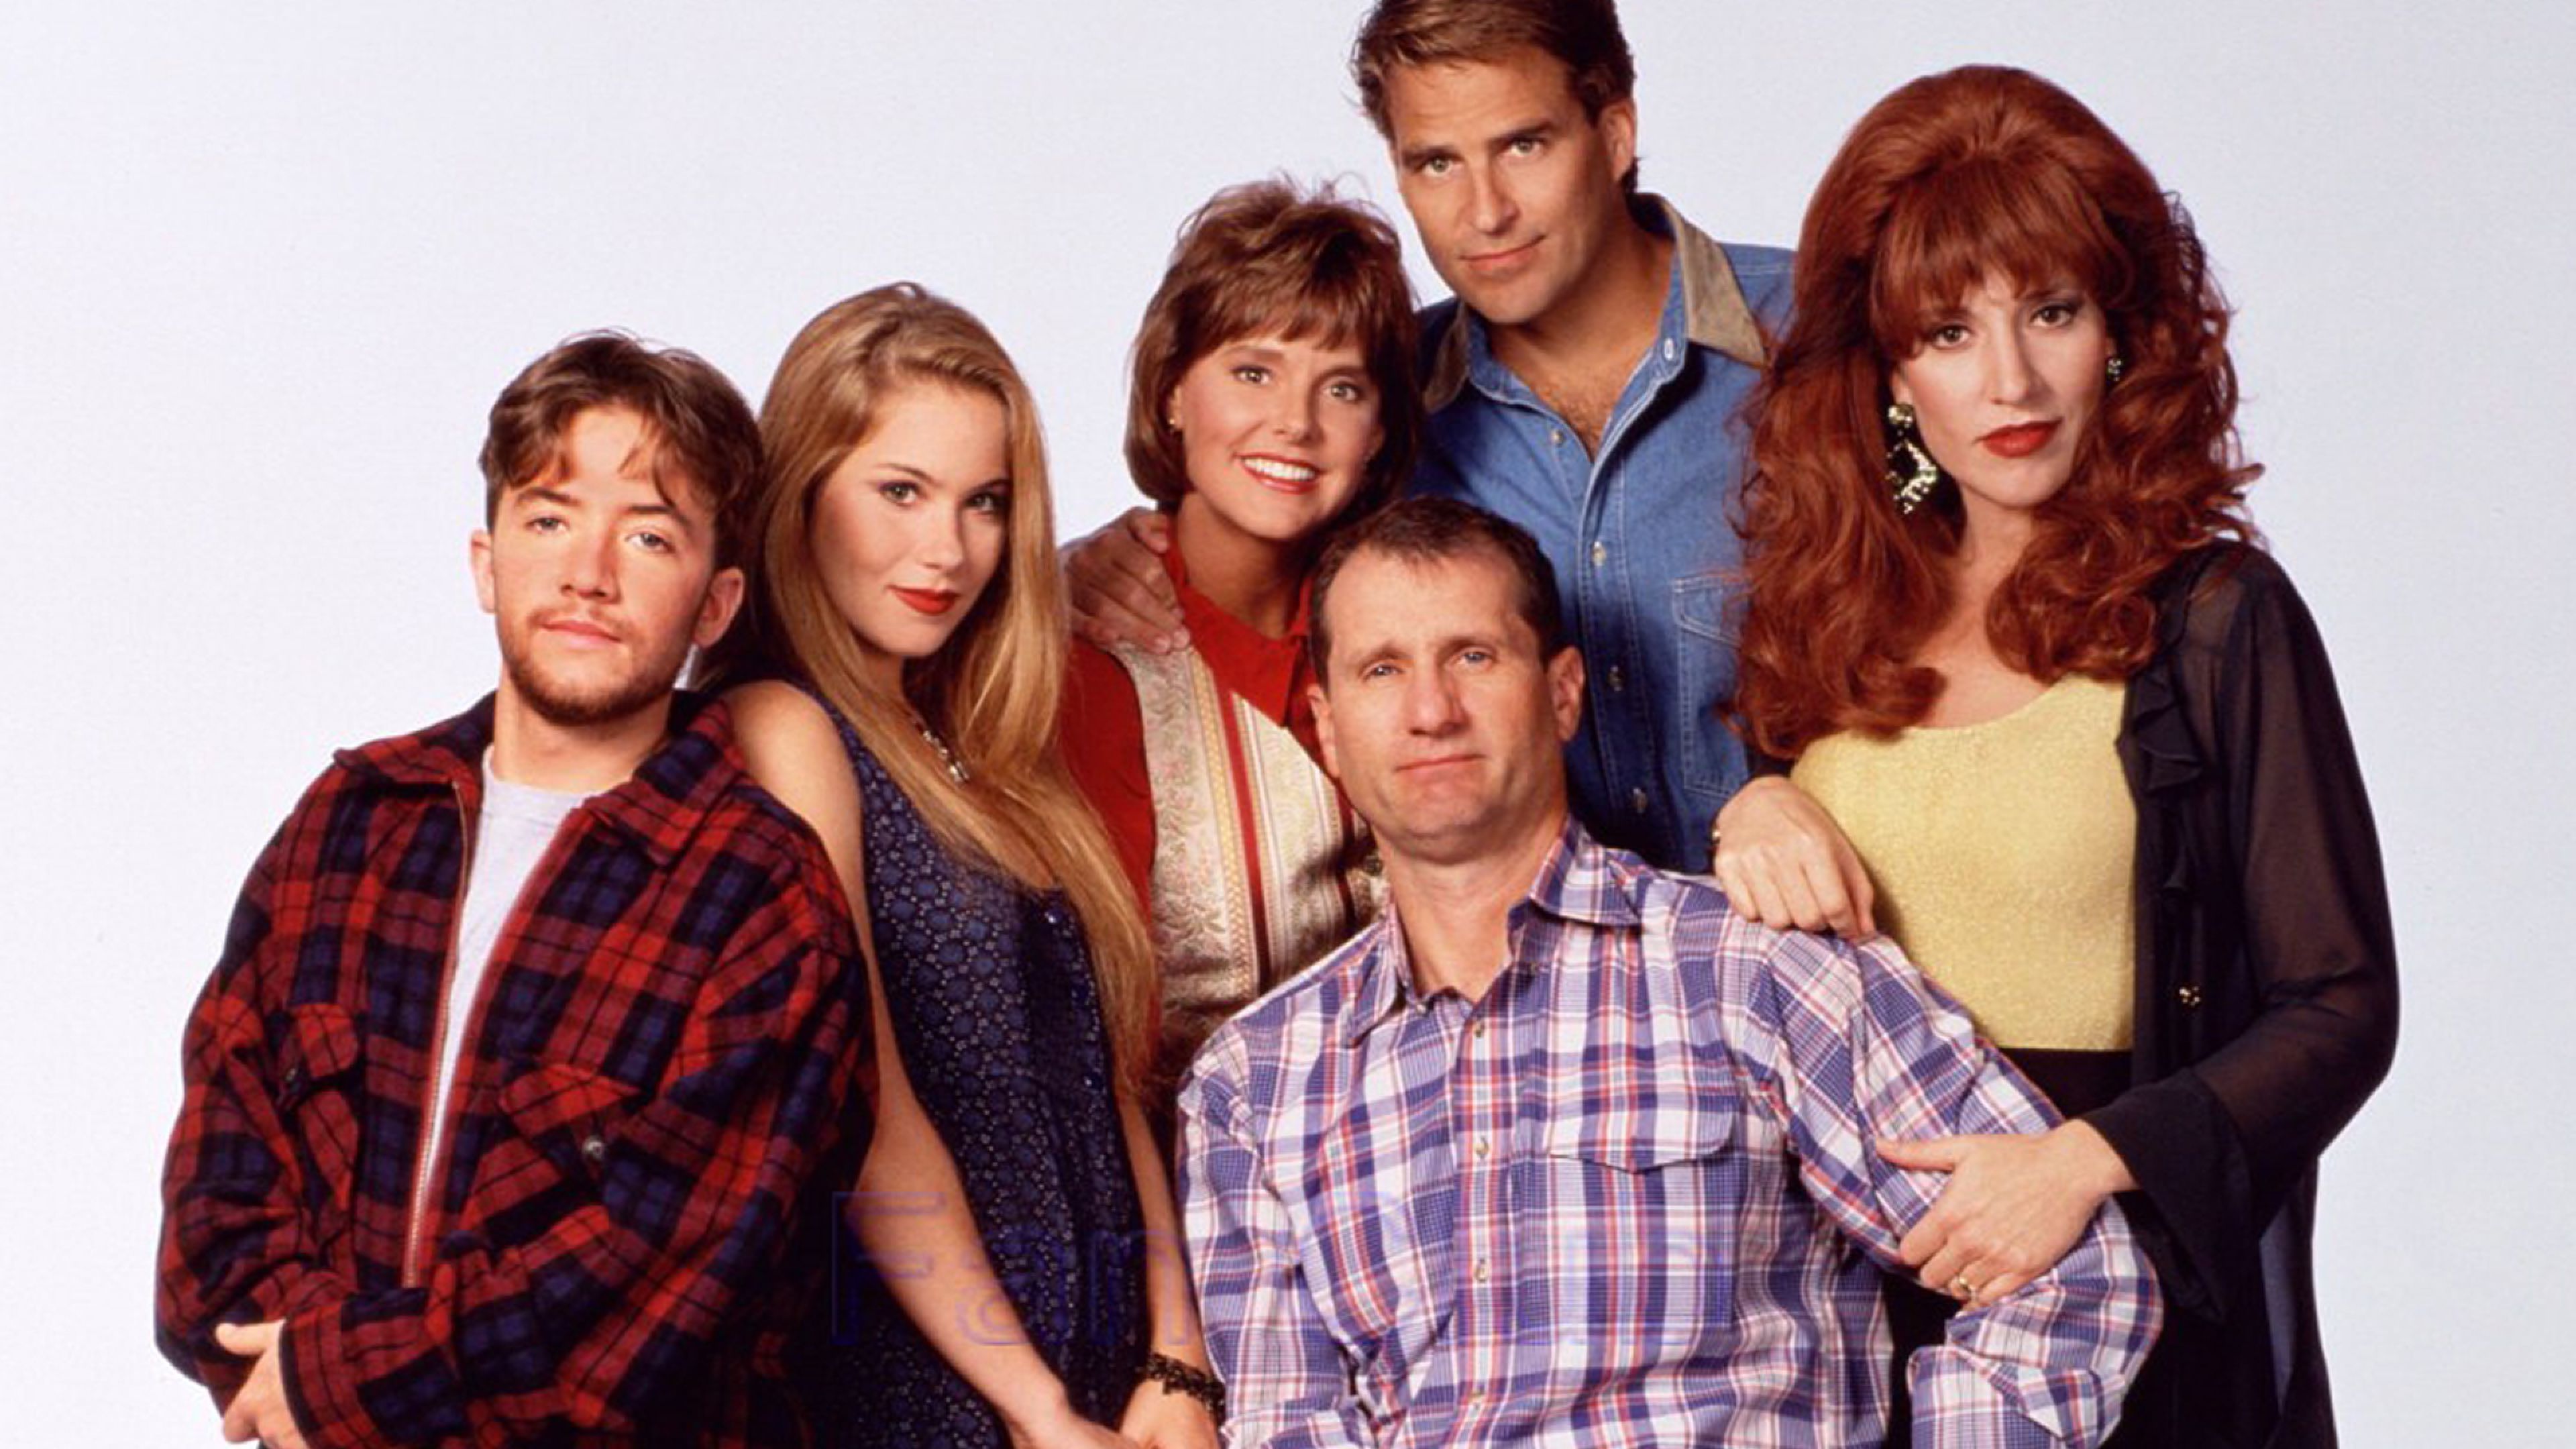 married with children, al bundy, peggy bundy 4K Wallpaper, HD TV Series 4K Wallpaper, Image, Photo and Background